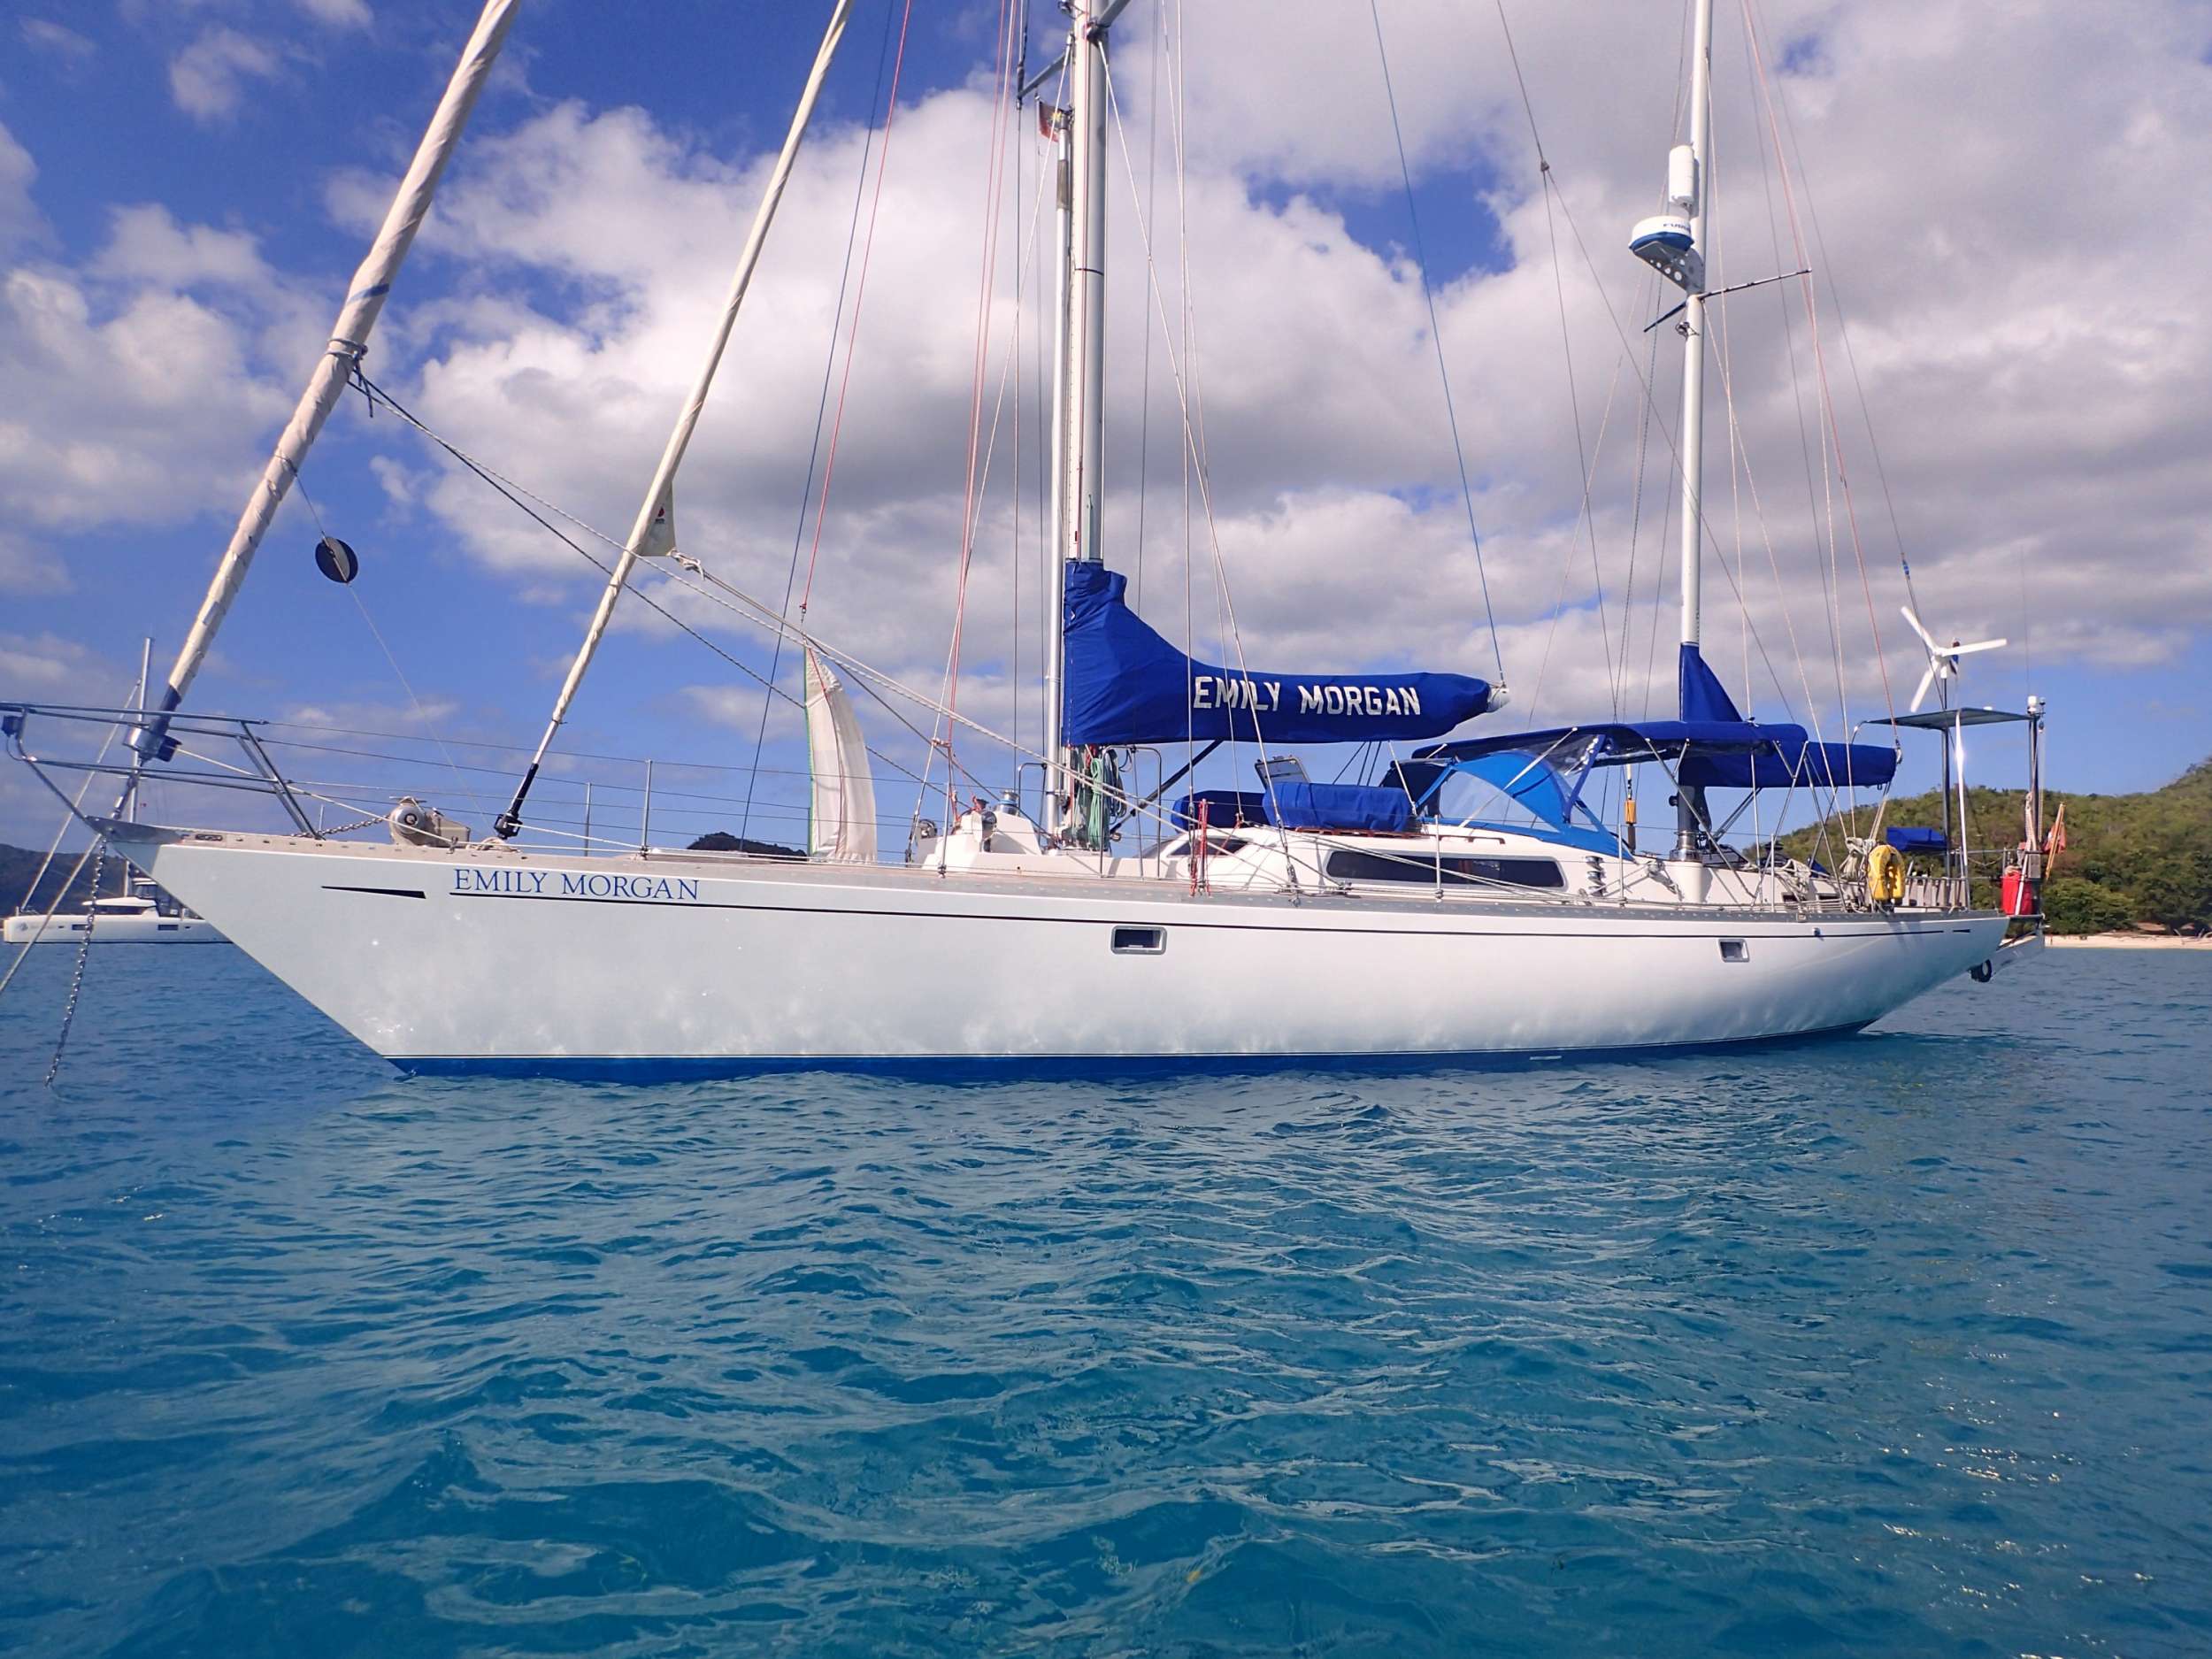 emily morgan - Yacht Charter Finland & Boat hire in Northern EU, Caribbean 1